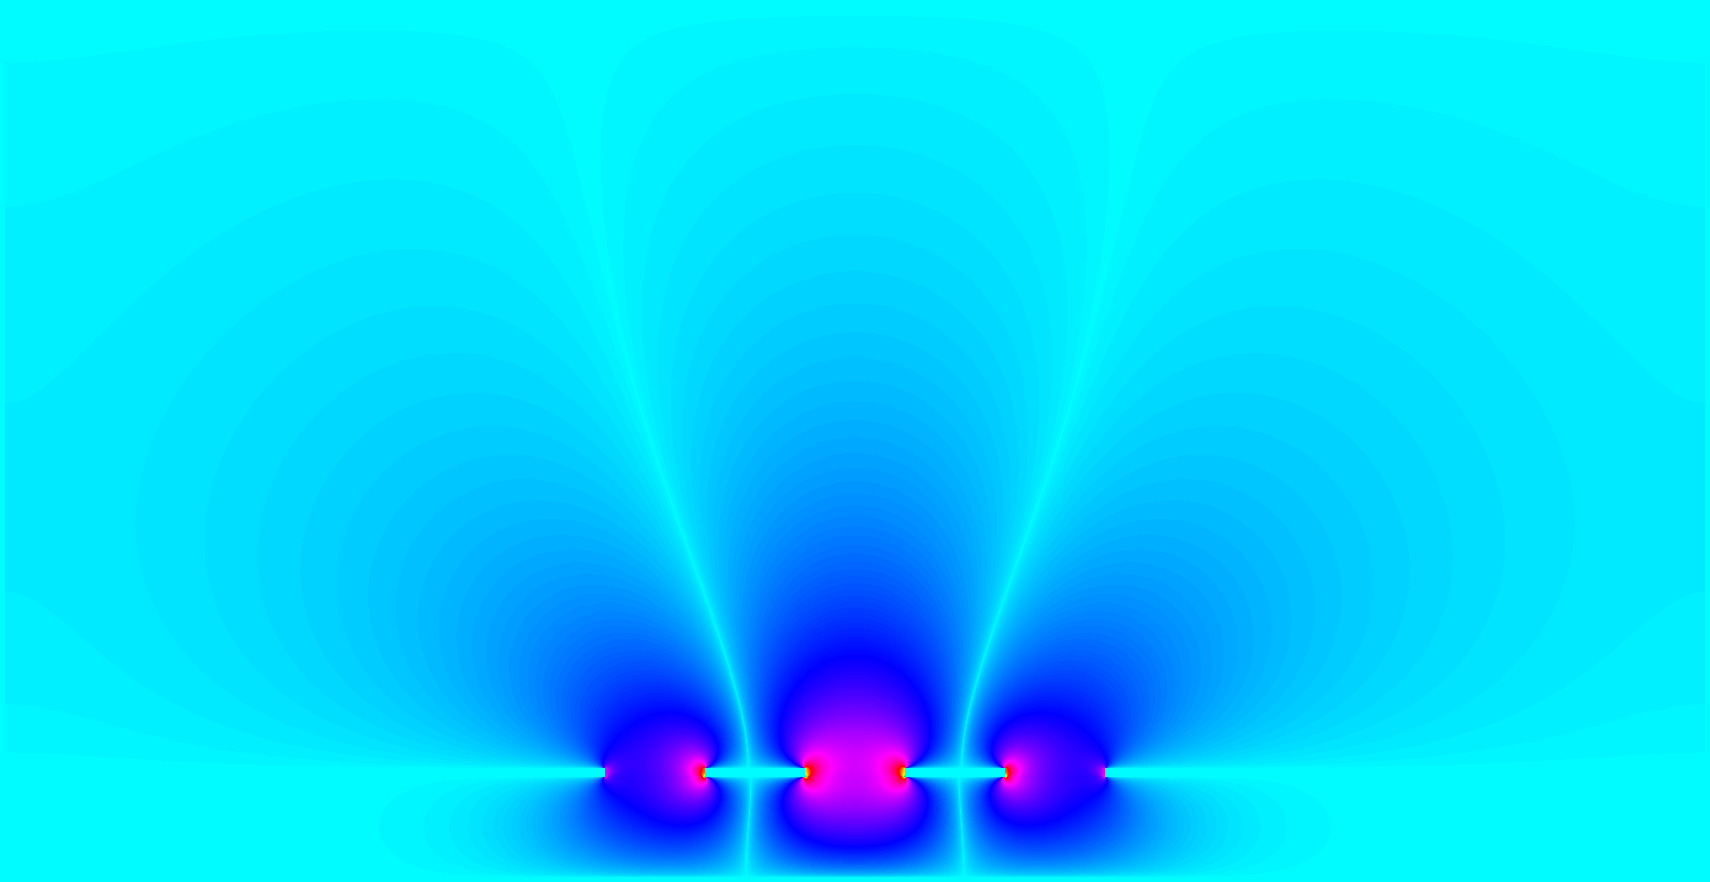 Pseudo color visualization of absolute value of electric field in odd mode